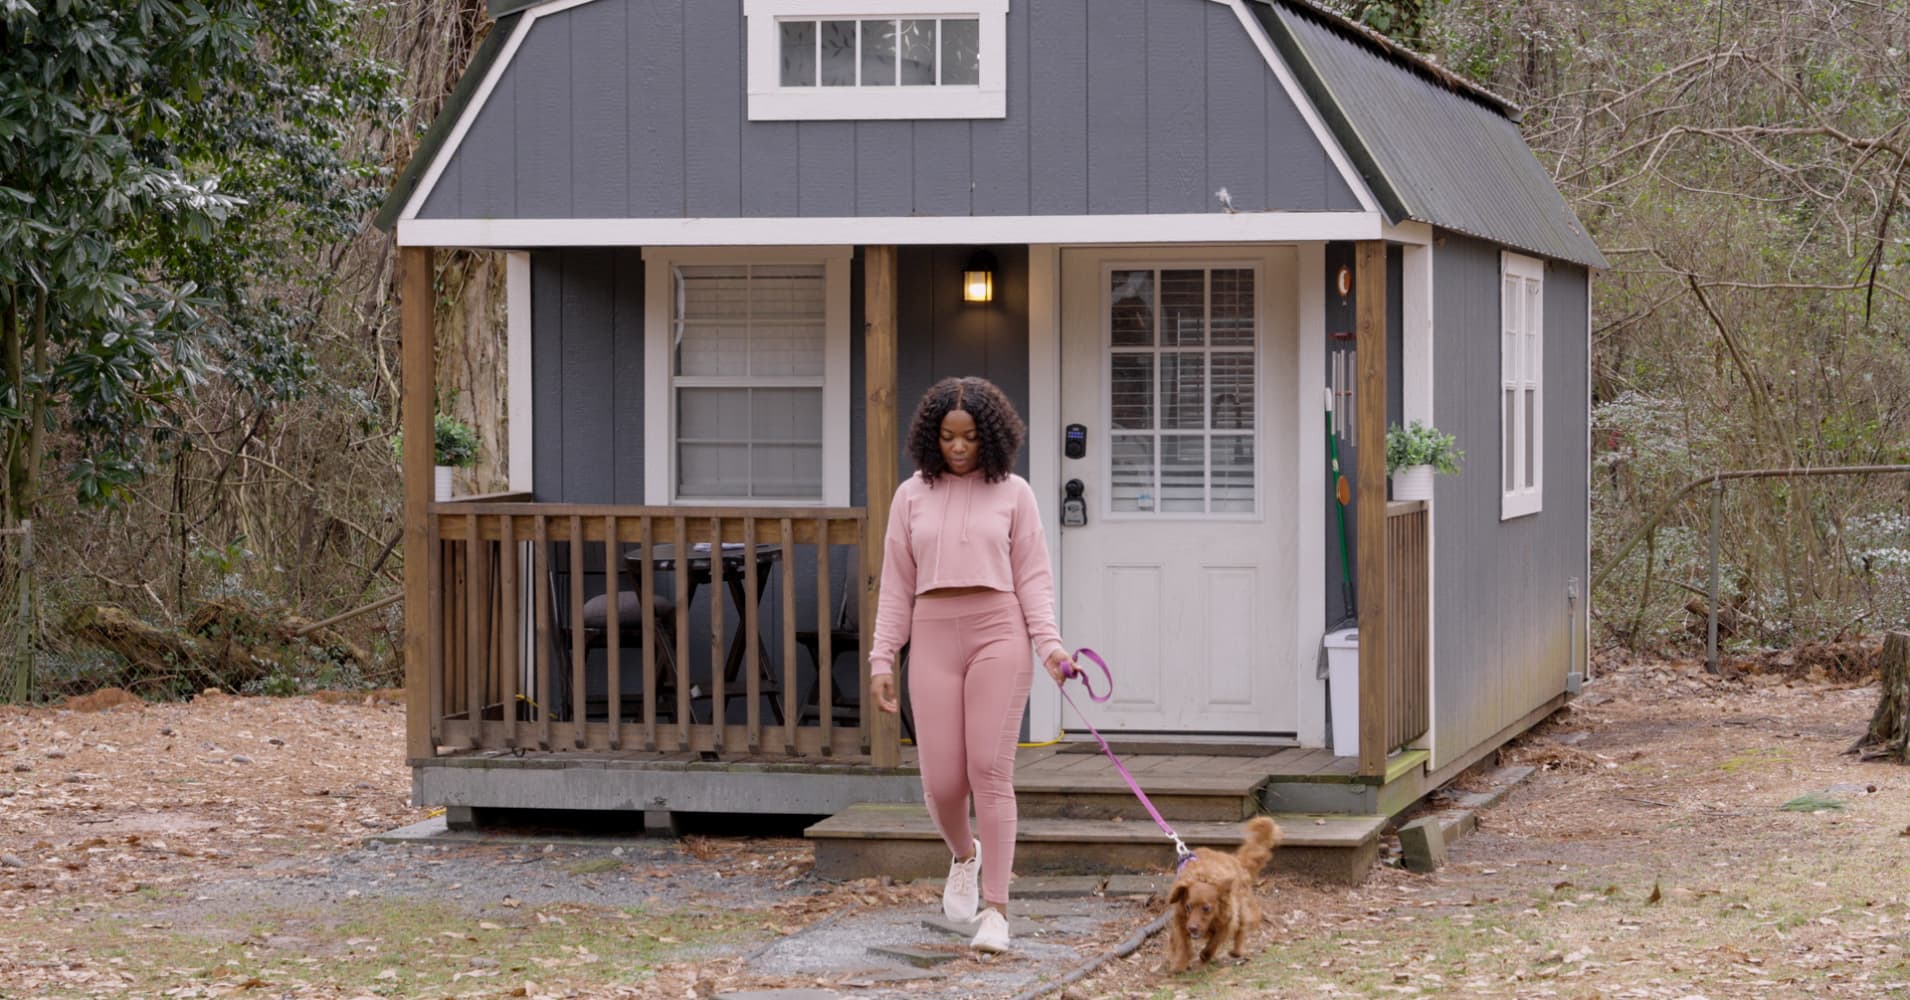 amazon, i built a 296-square-foot backyard tiny home in atlanta: what to know if you want to convert a $5,000 shed from costco